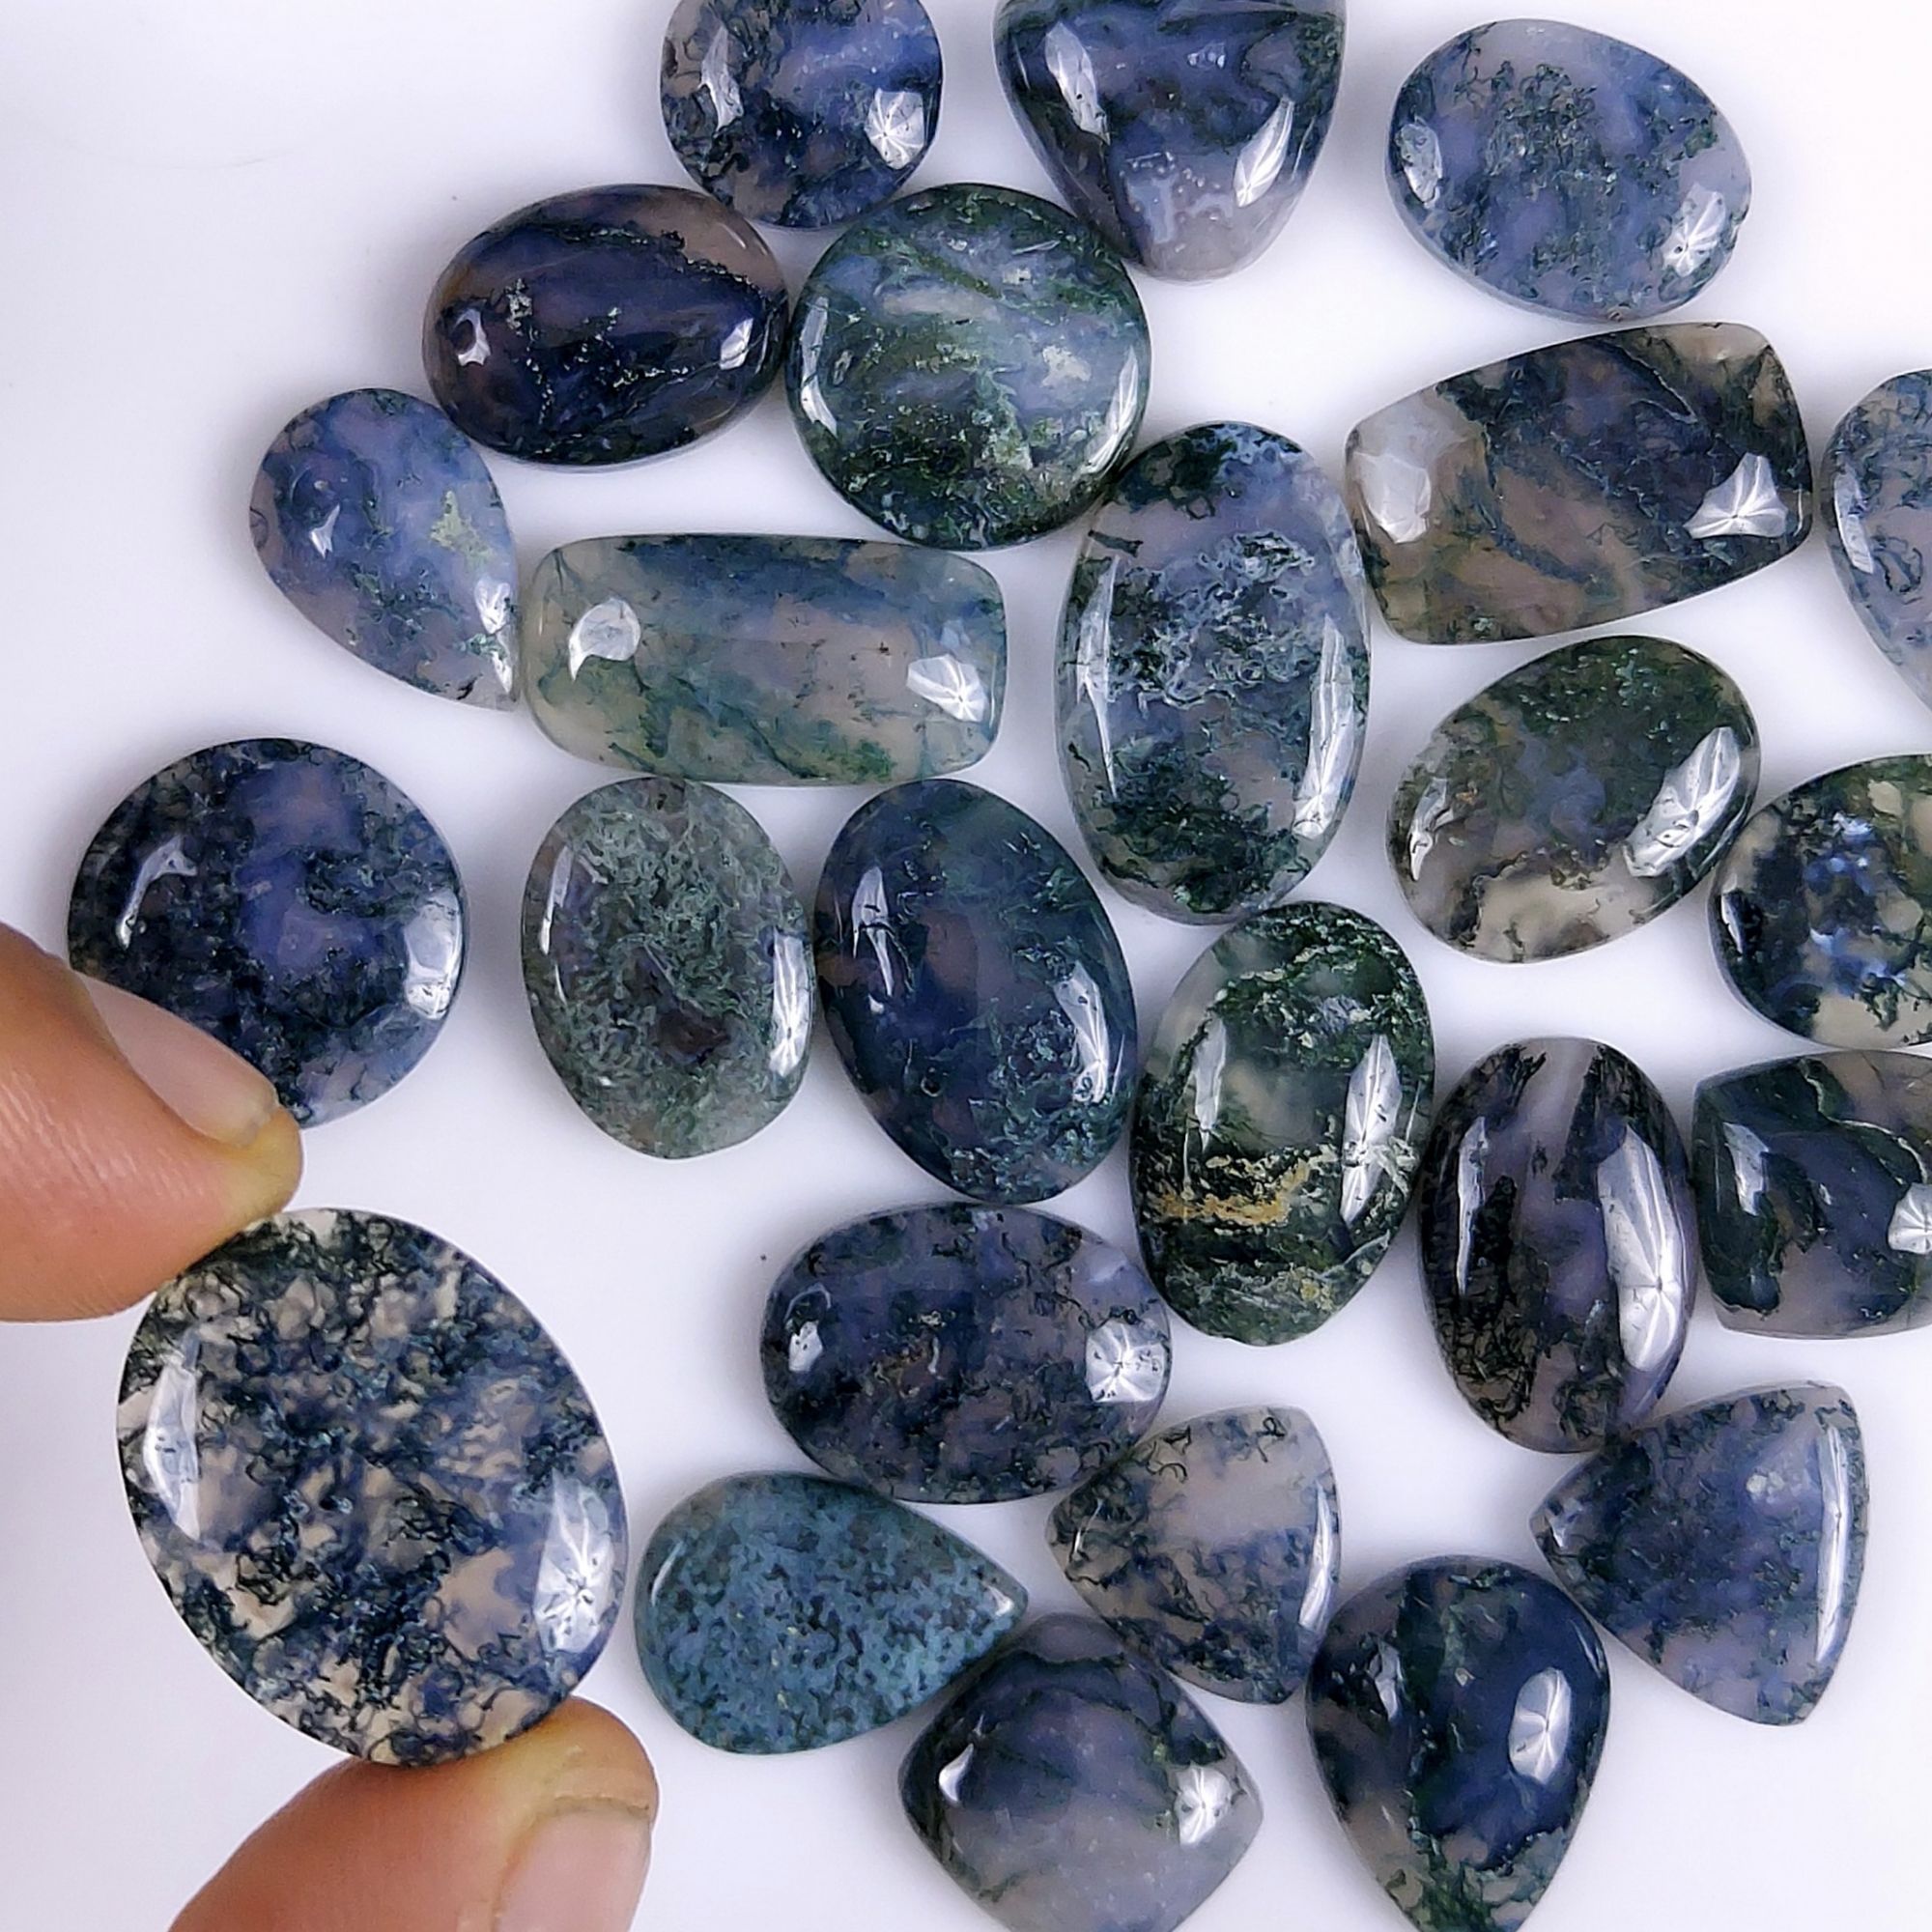 25Pcs 279Cts Natural Green Moss Agate Cabochon Lots Mixed Shapes And Sizes Moss Agate loose gemstone Cabochon Wholesale Lot 20x10 12x12mm#G-360